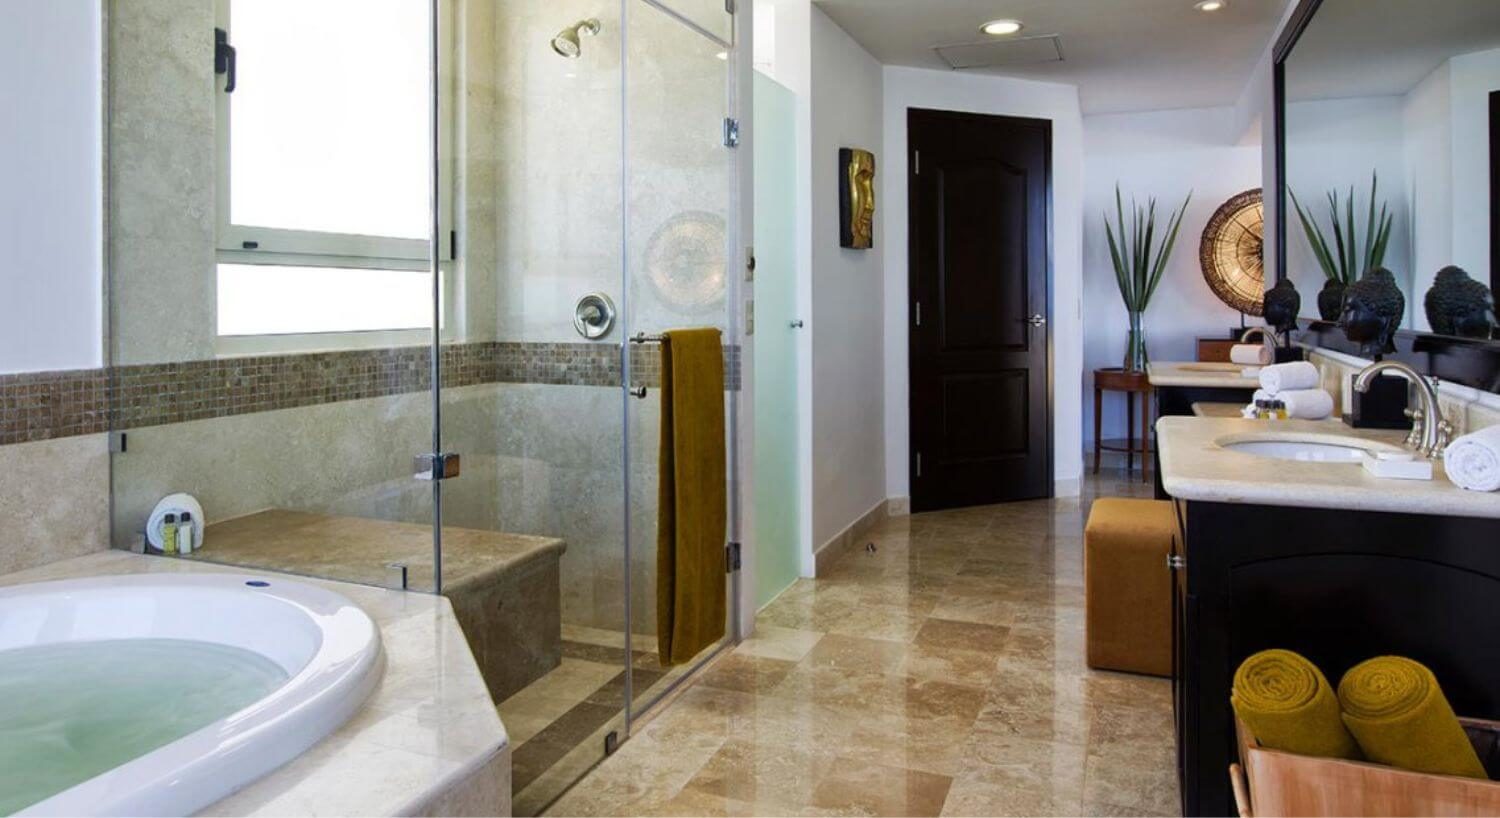 A spacious bathroom with double granite topped sinks, a deep soaking tub, a walk in shower with bench, and rolled gold towels in a basket.